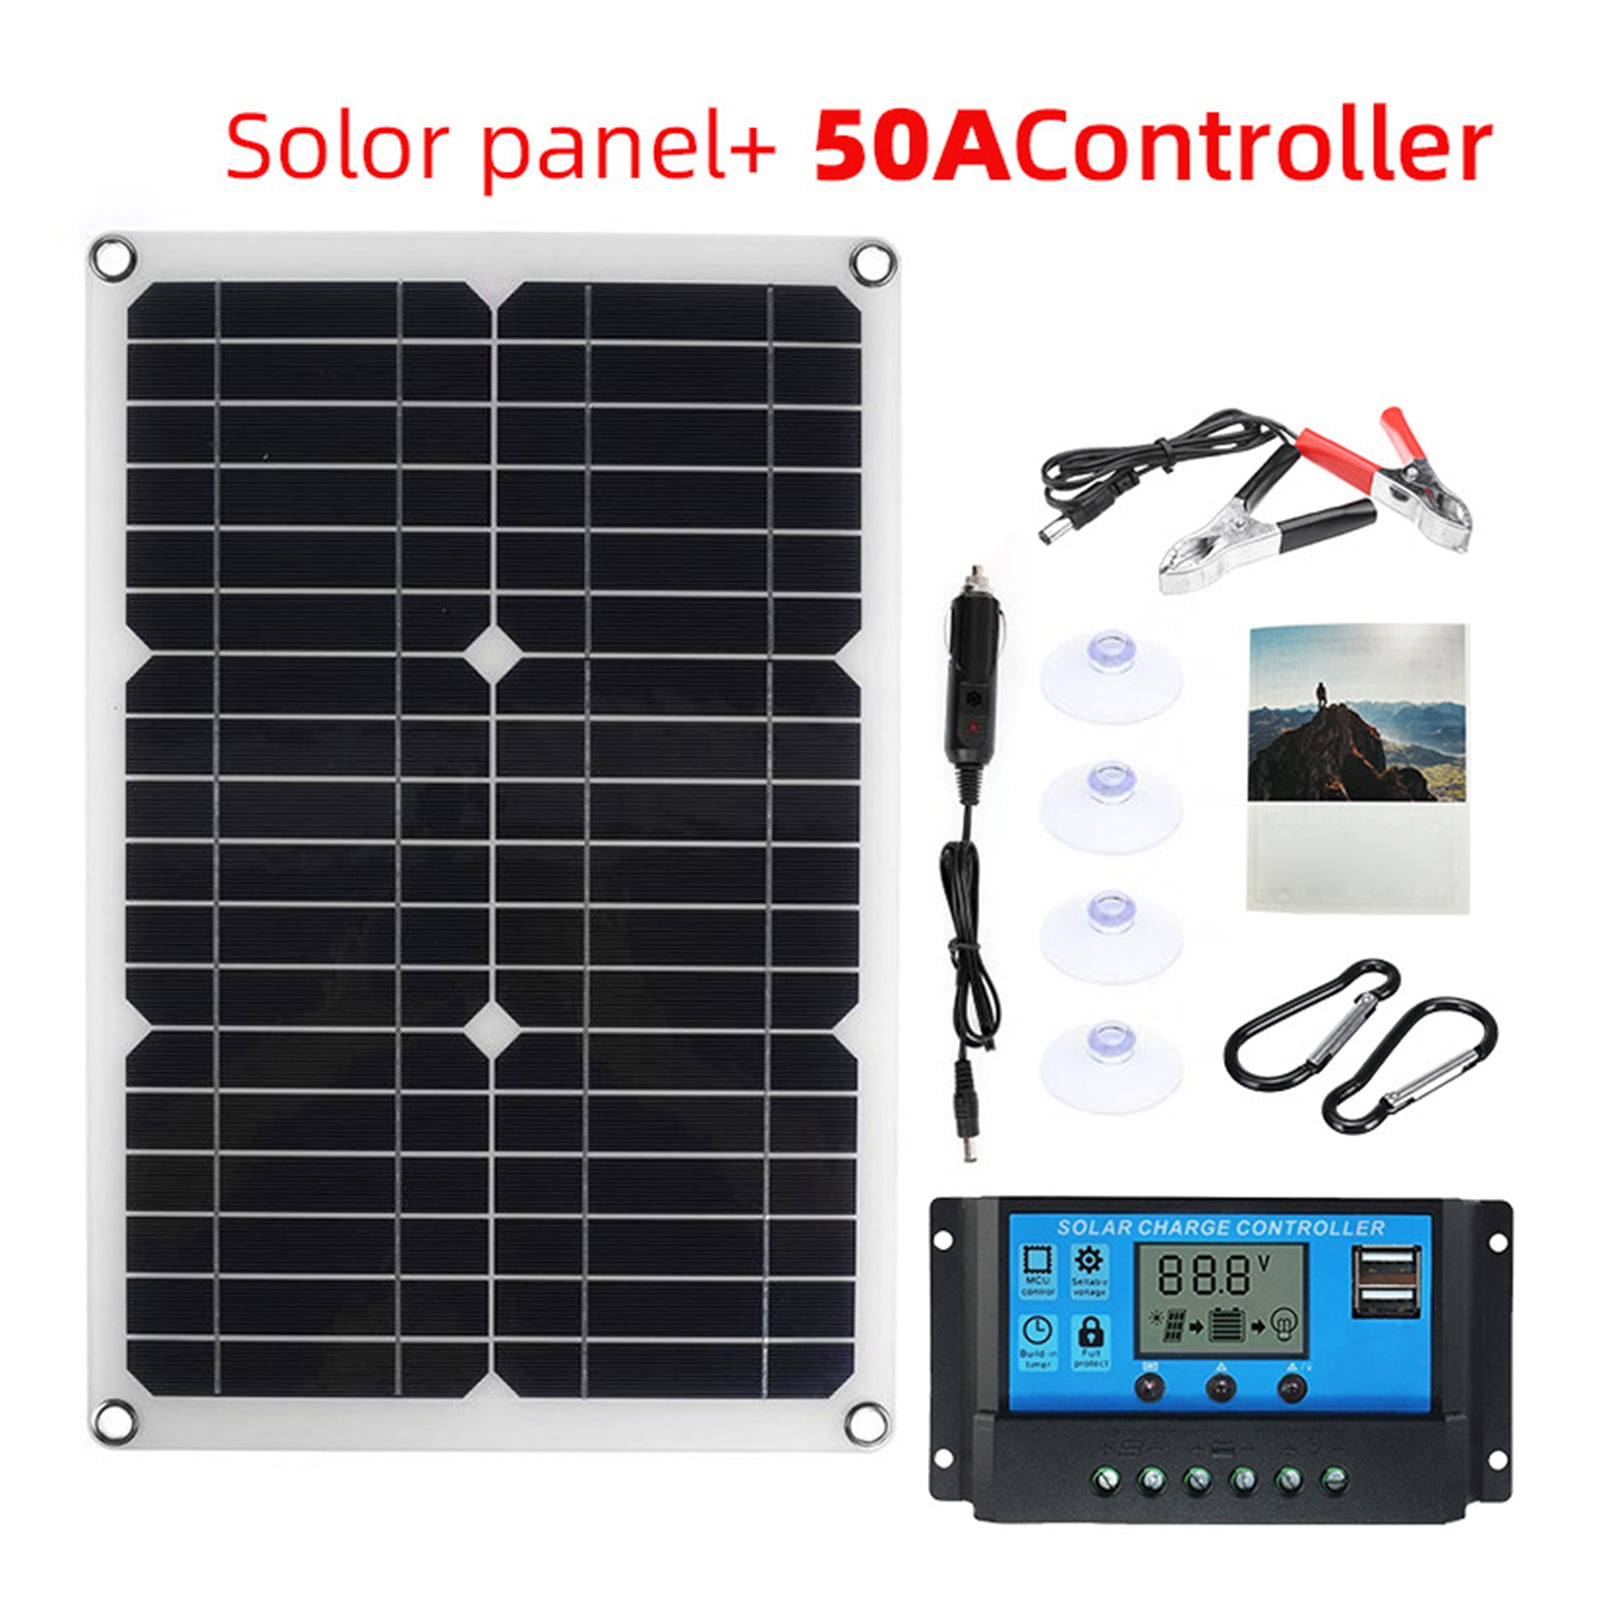 Alomejor 5W Solar Panel Photovoltaic Polycrystalline Silicon Solar Panel Come With Crocodile Clip for Charging A 12v Battery In A Caravan Motorhome Camper Yacht Boat 